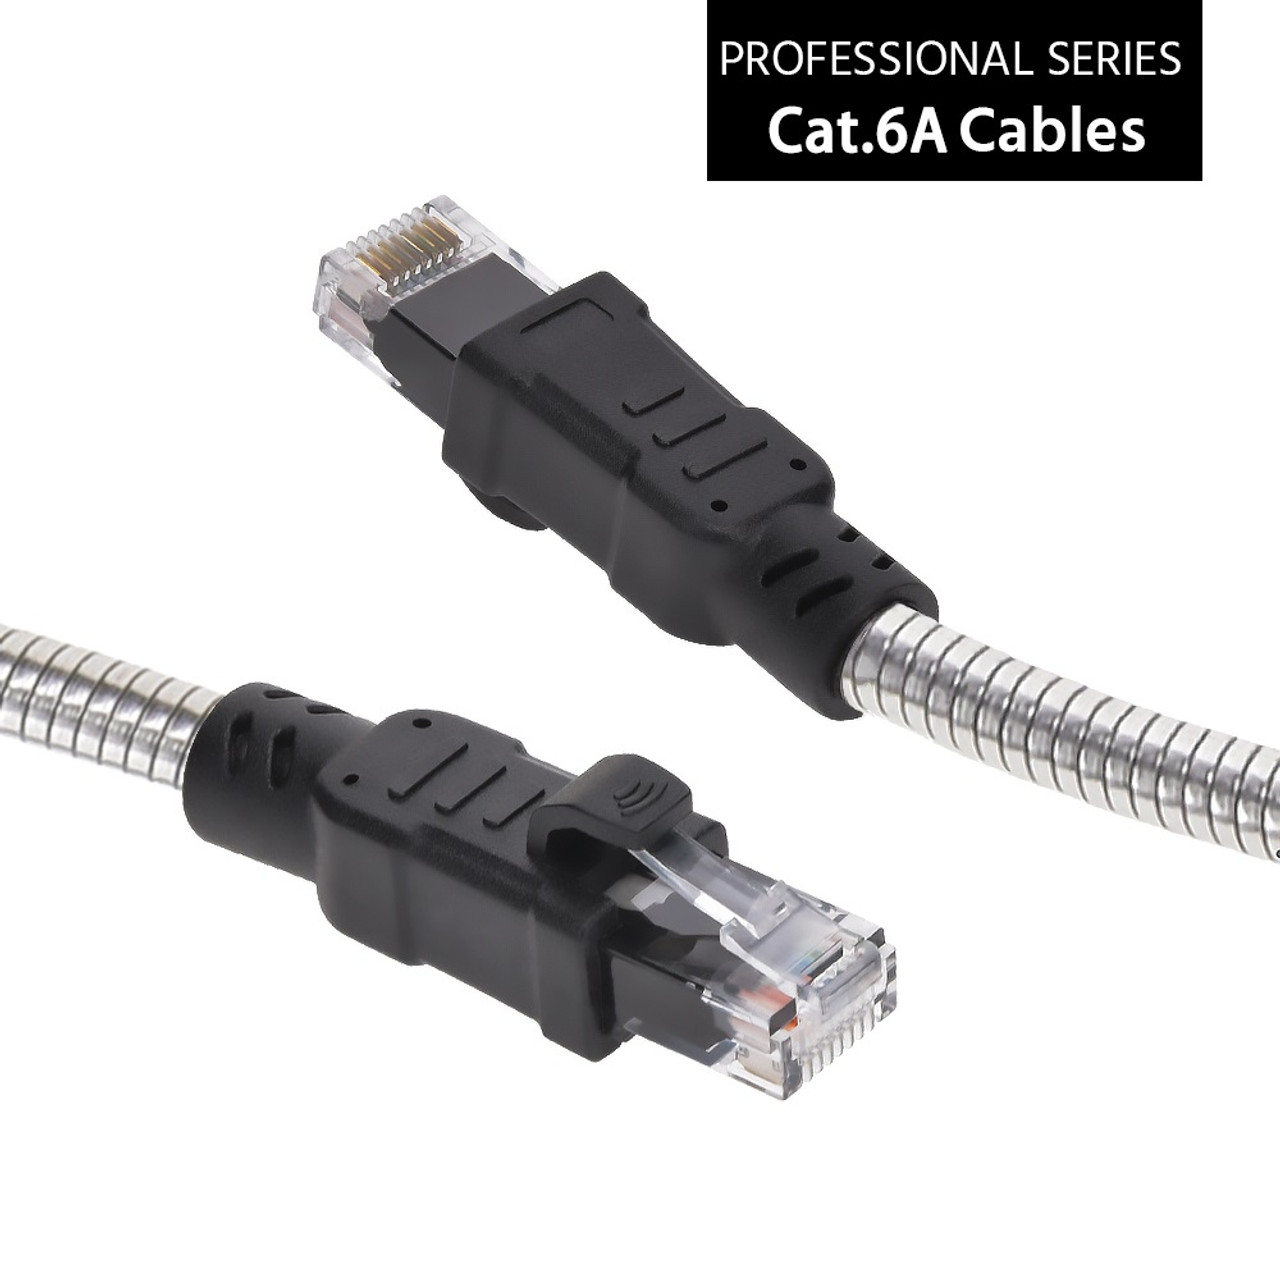 Cat8 Ethernet Cable 75 Feet STP 26awg Black